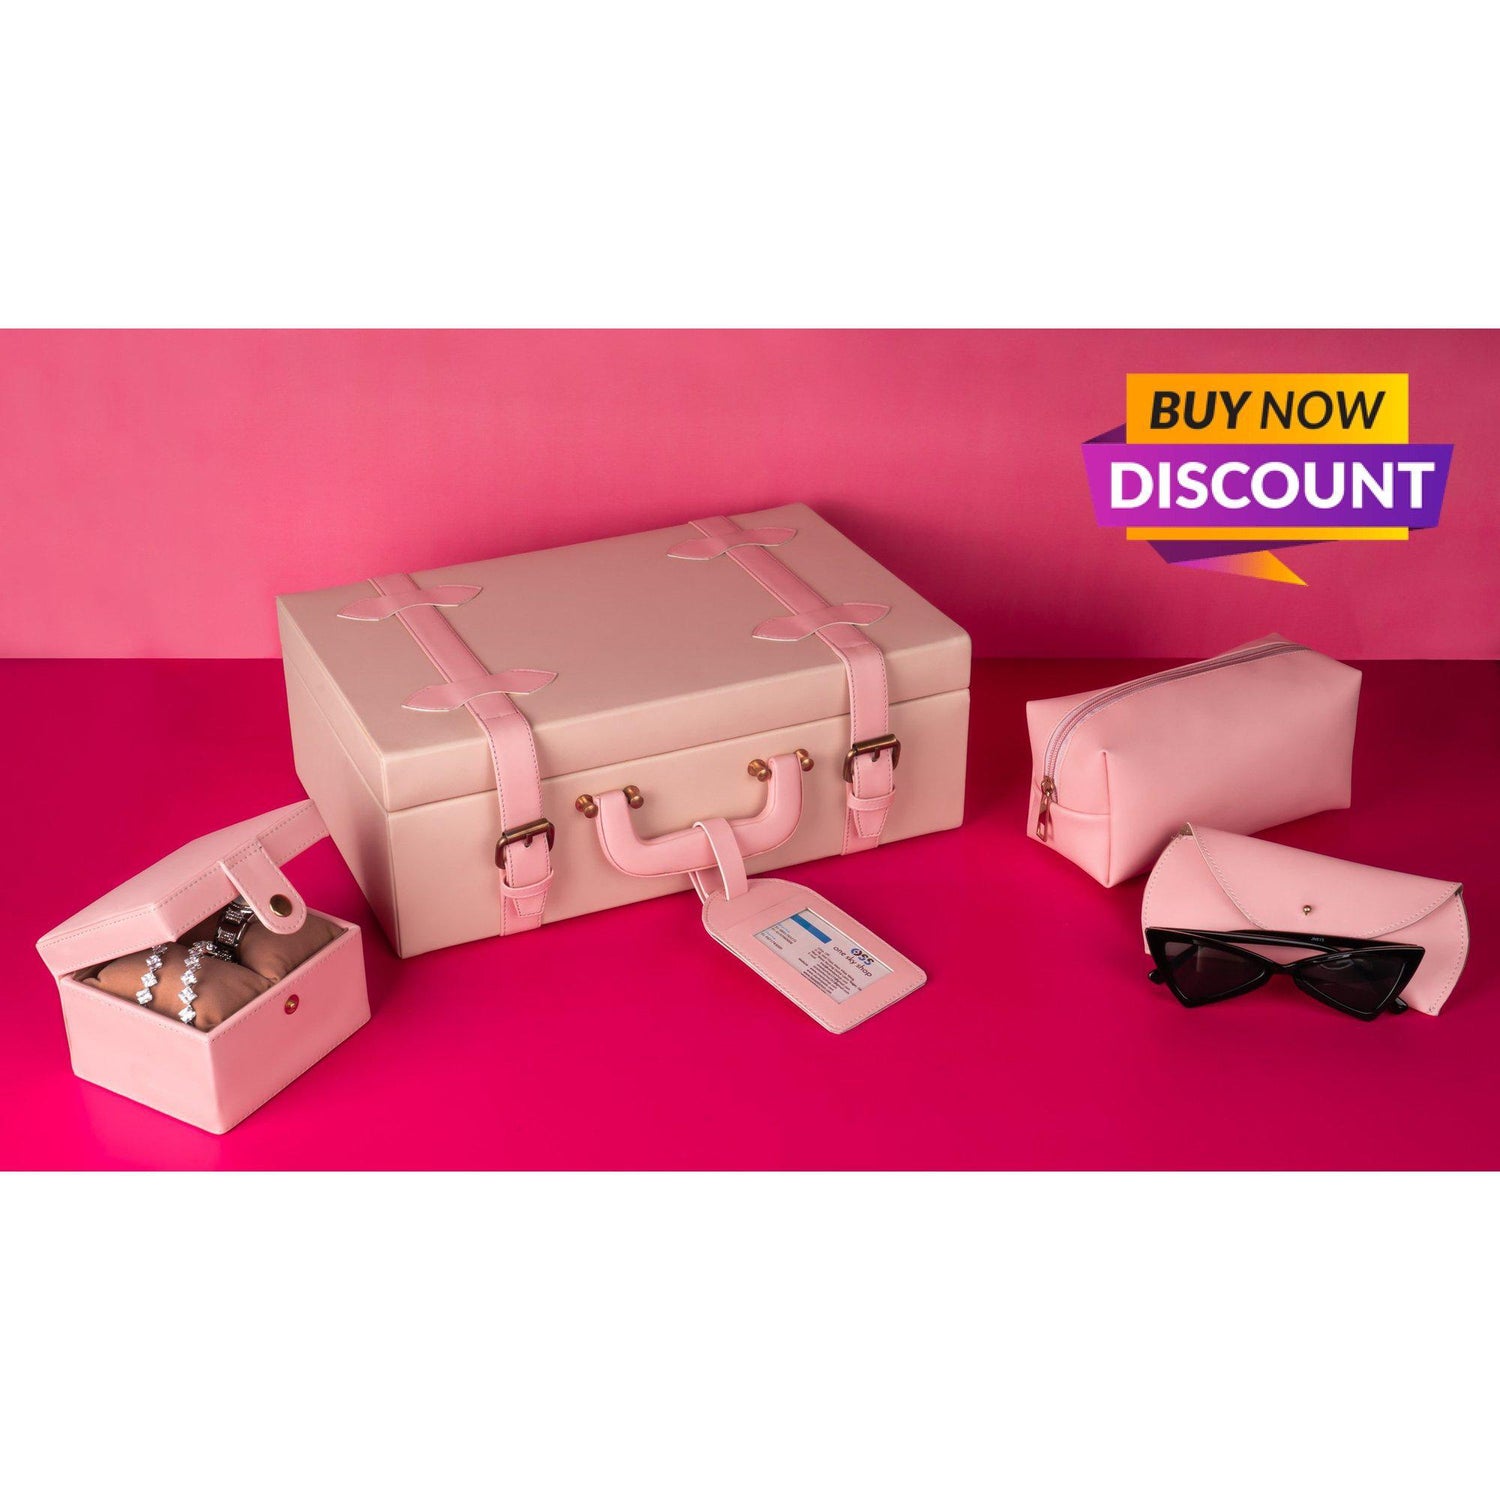 Leather Trunk Box for Women-Gift Set-ONESKYSHOP